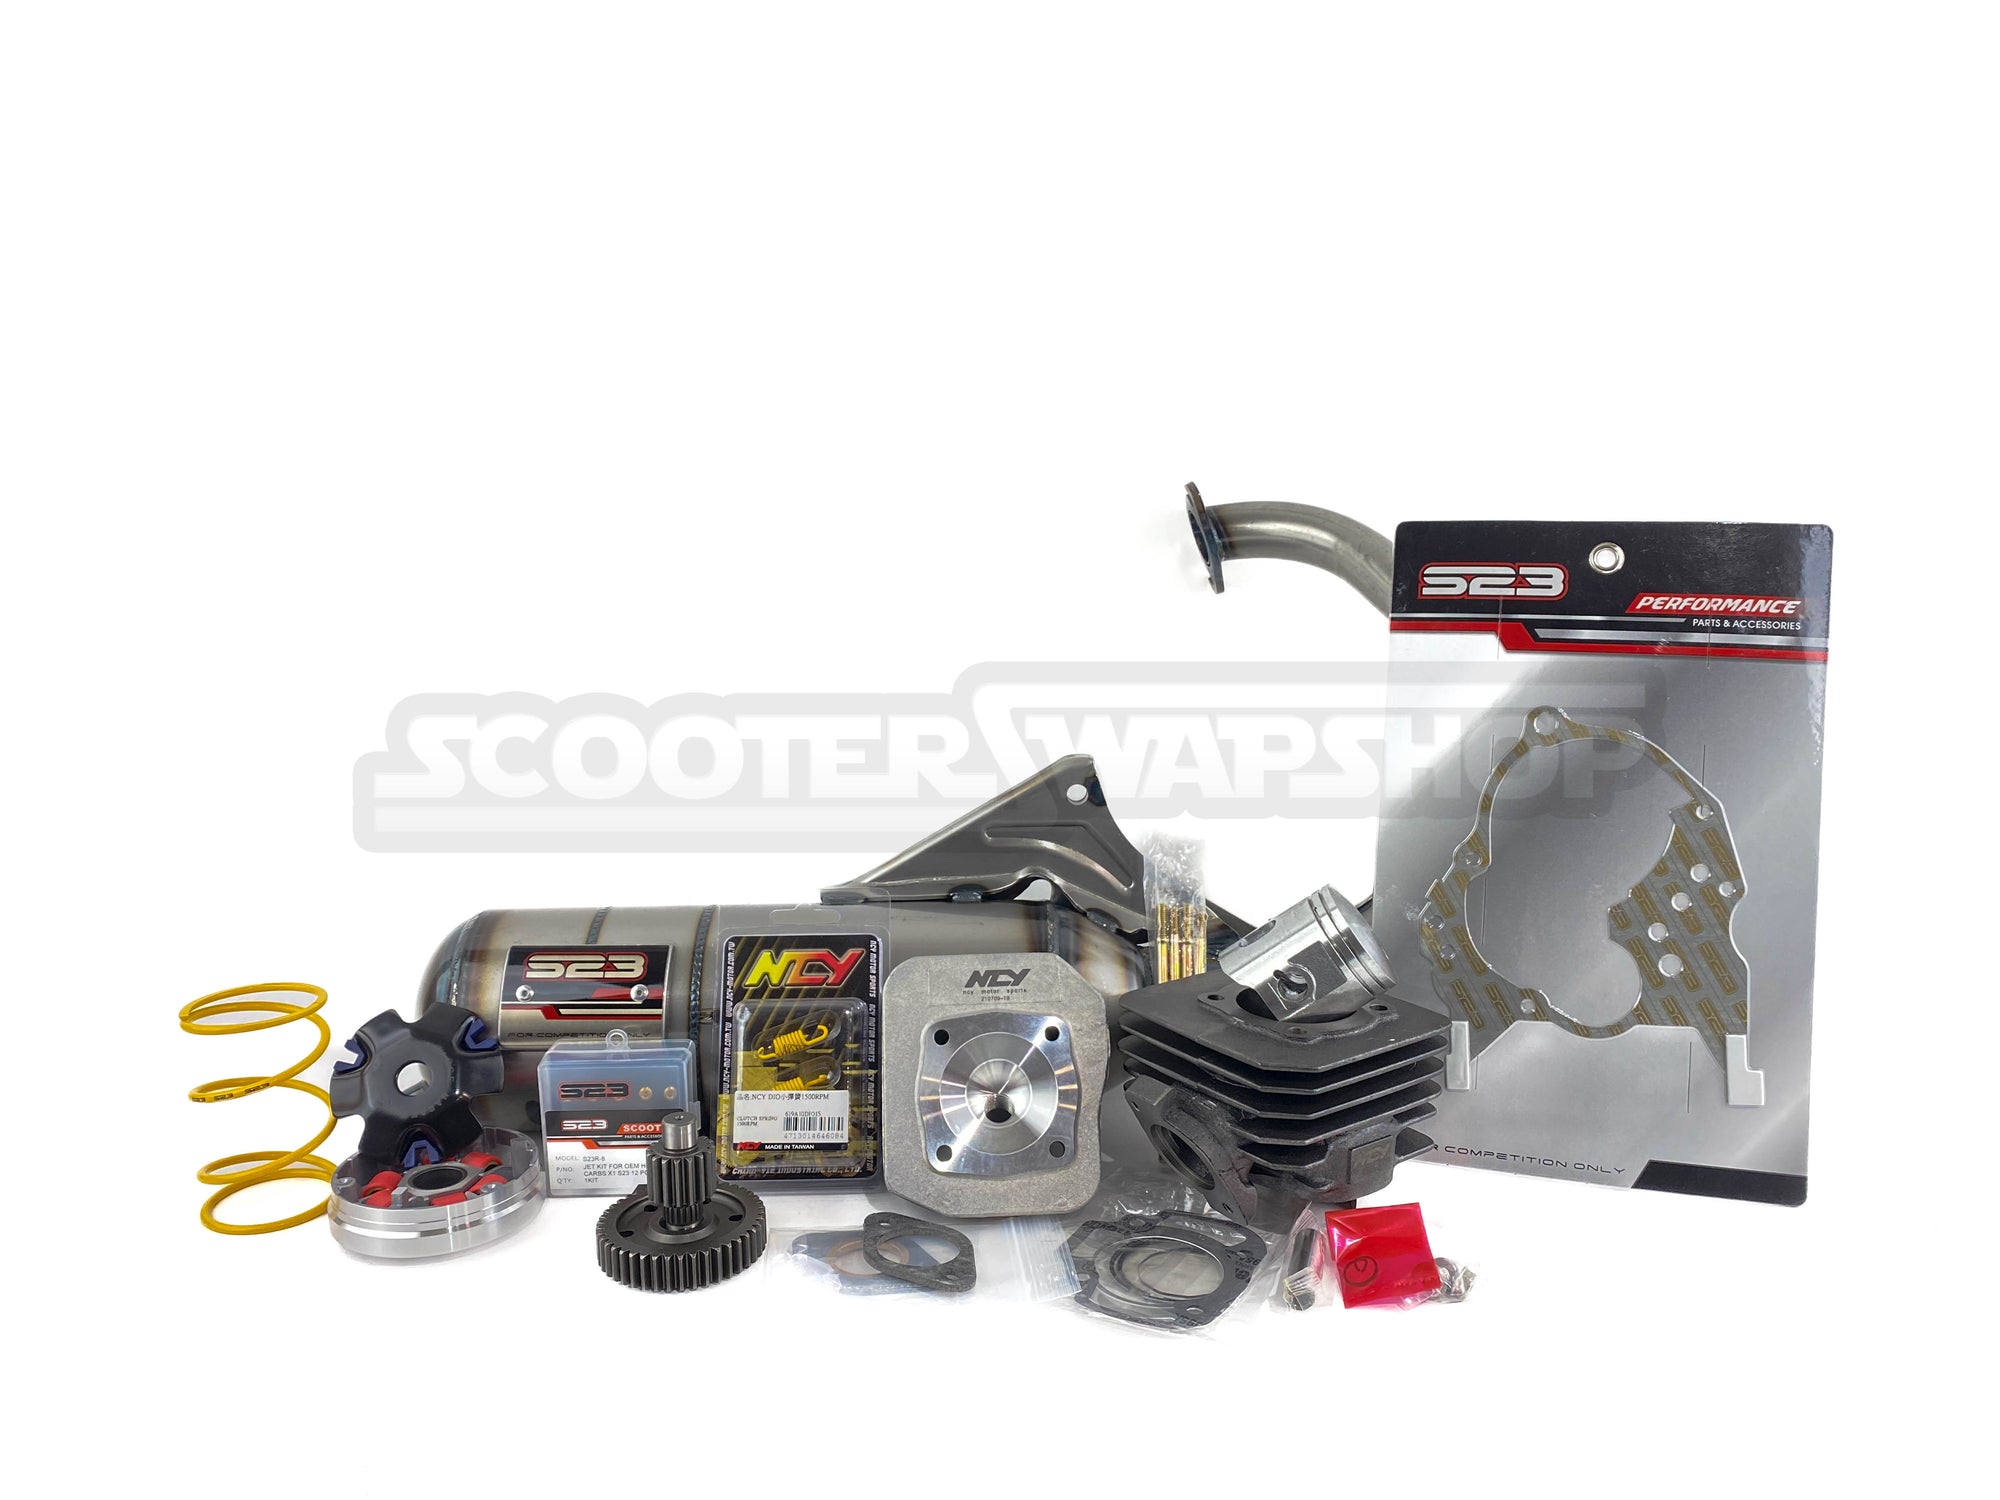 Honda Elite Scooter Performance Parts | Scooterswapshop Tagged